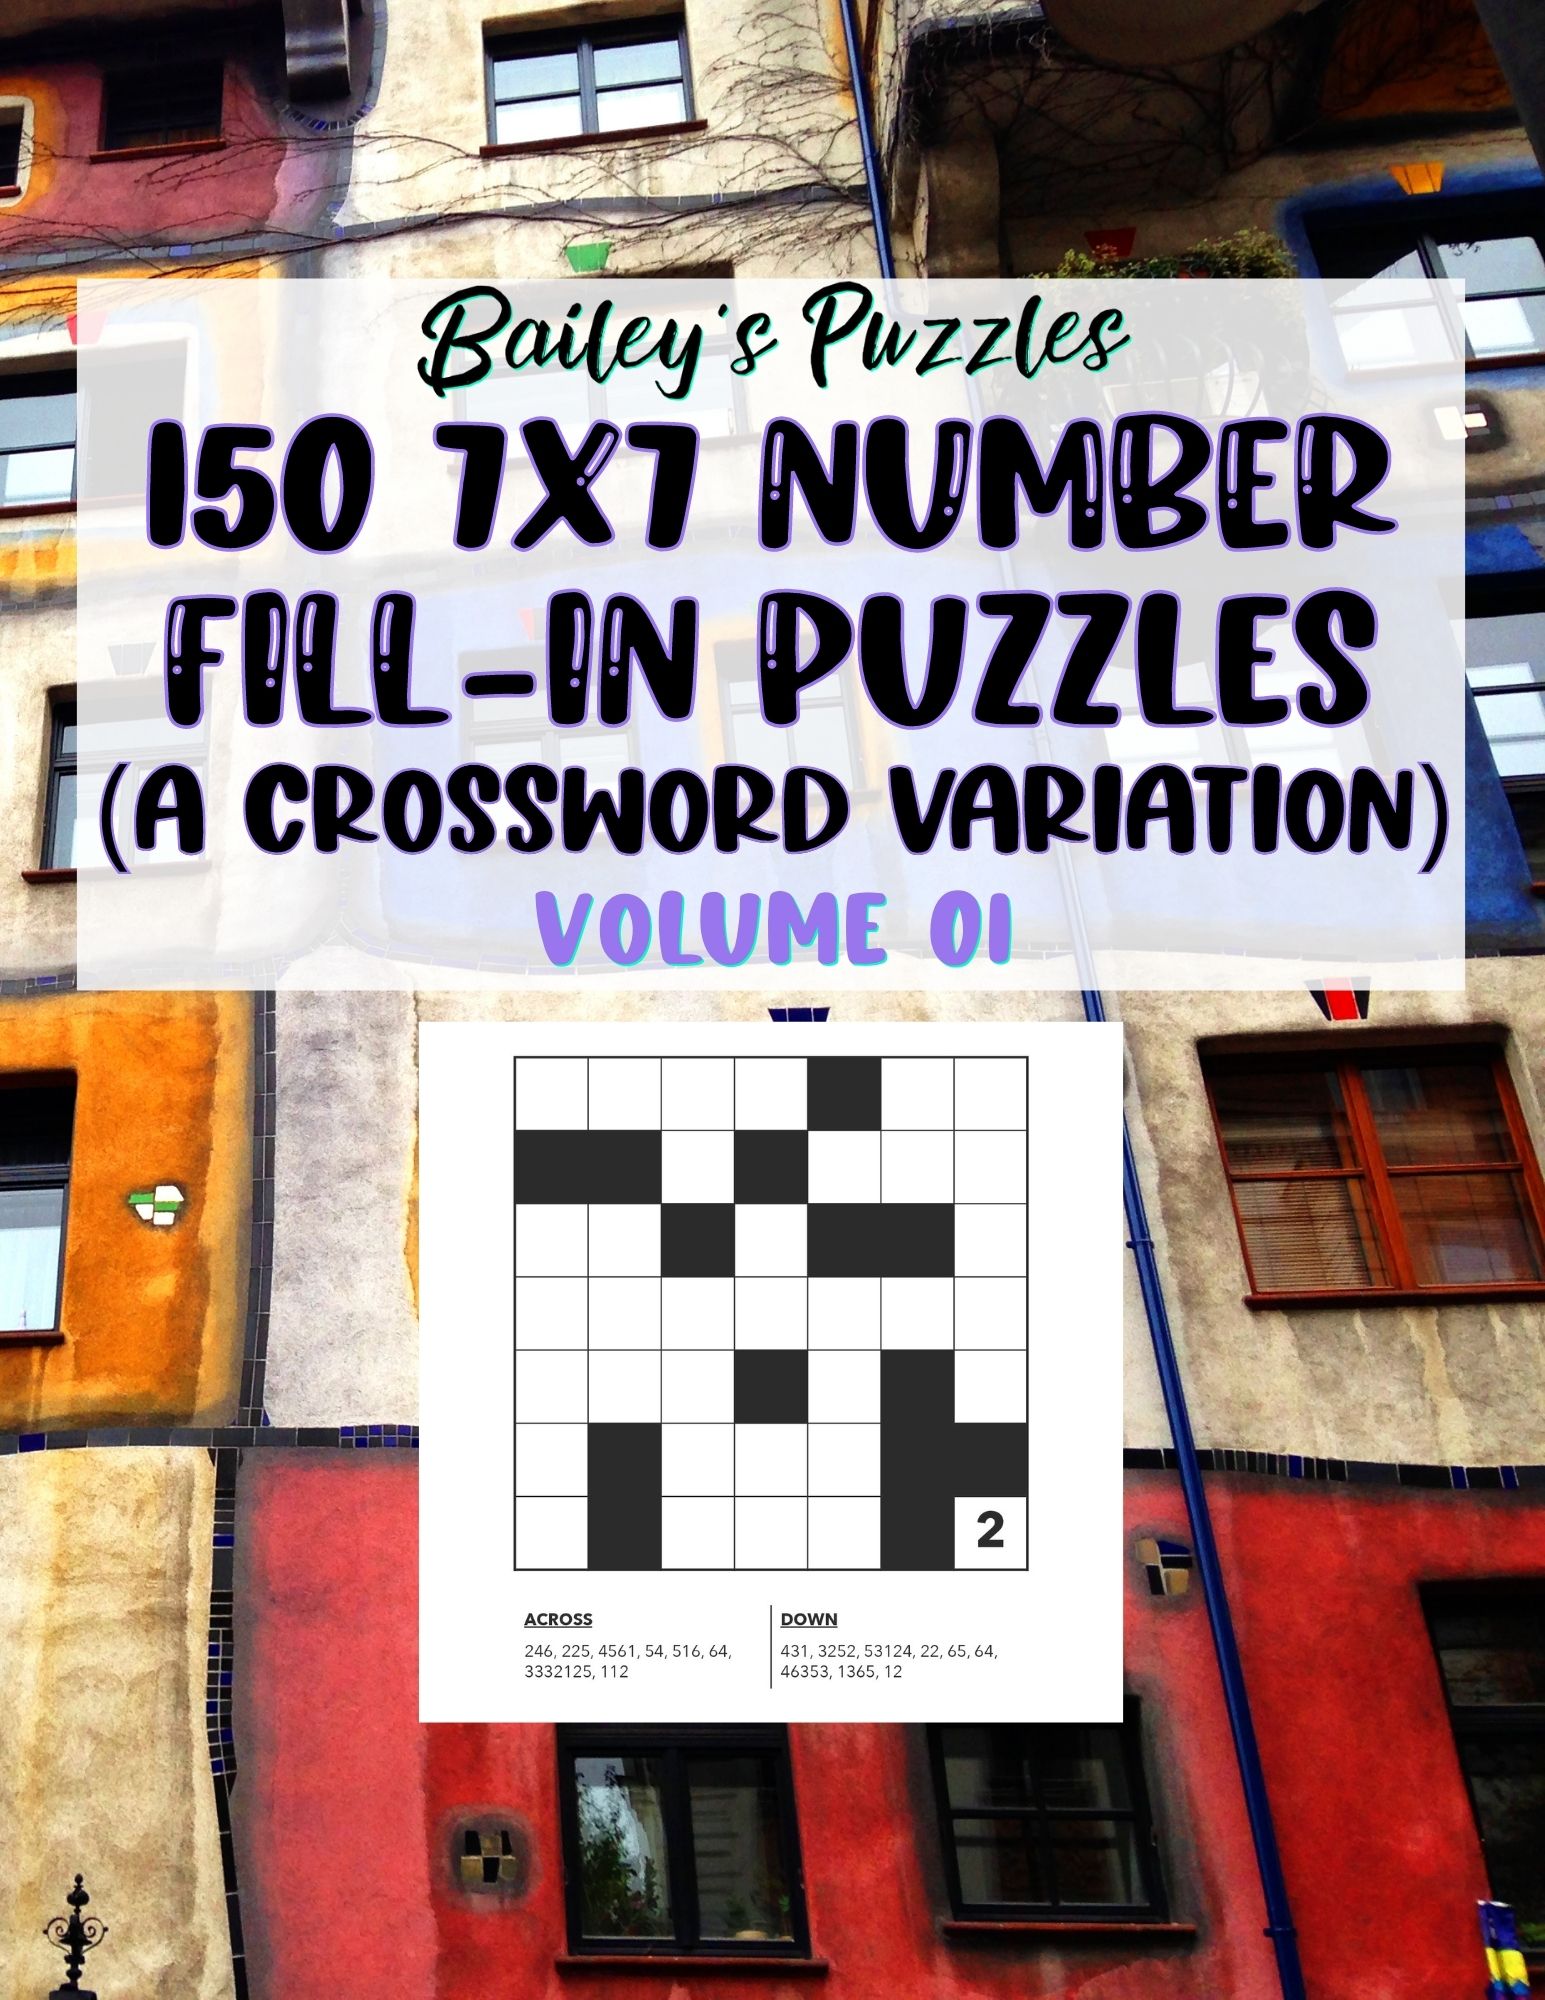 Front Cover - 150 7x7 Number Fill-In Puzzles (a crossword variation): volume 1